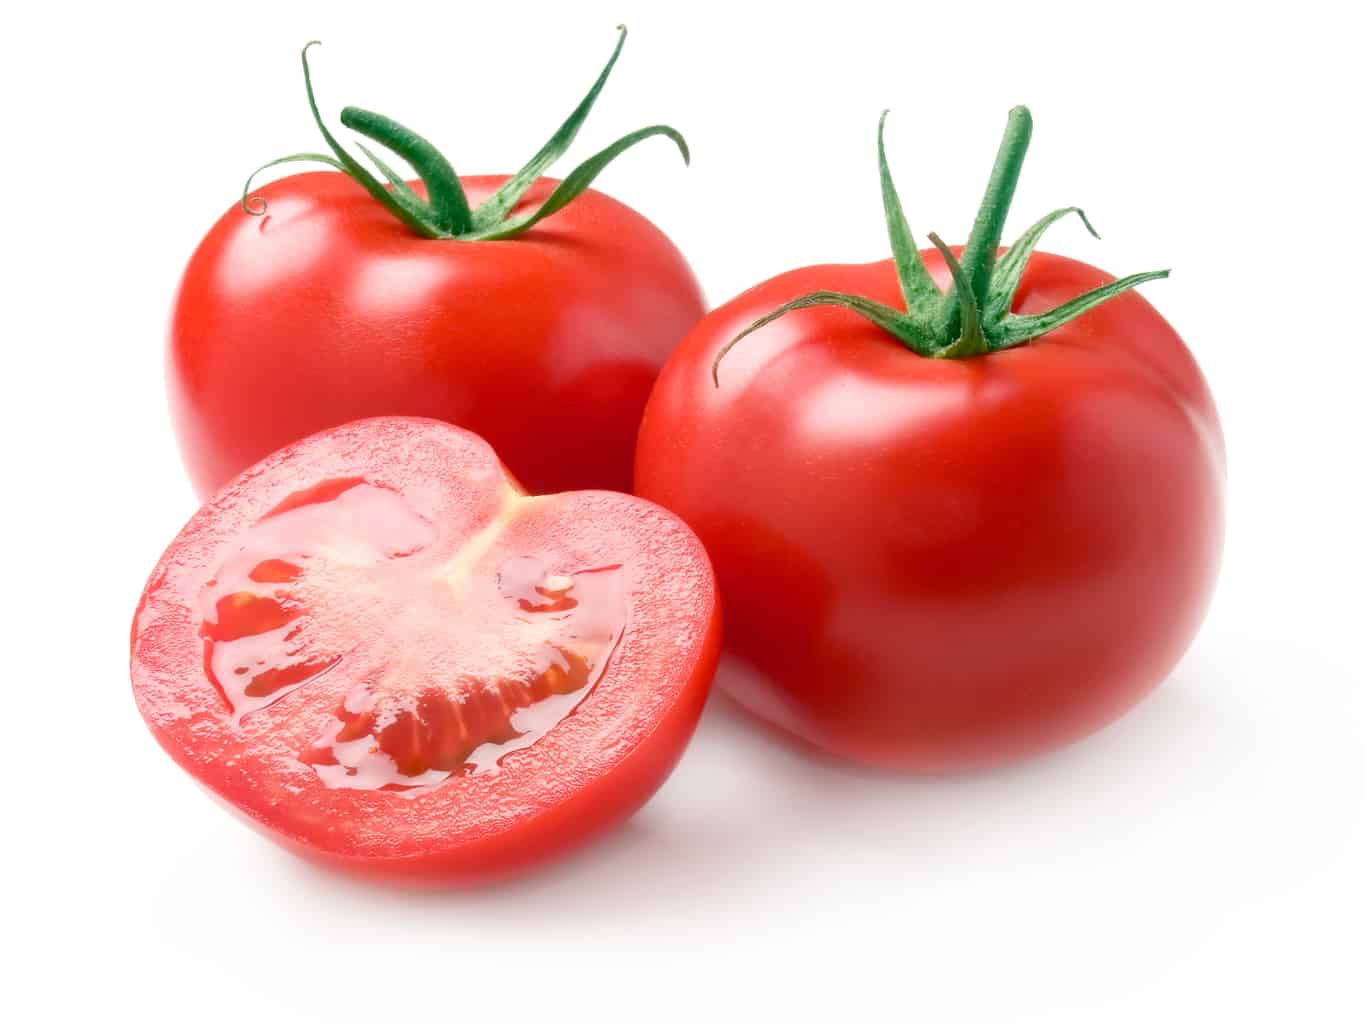 The trouble with tomatoes (testosterone issue - read this)